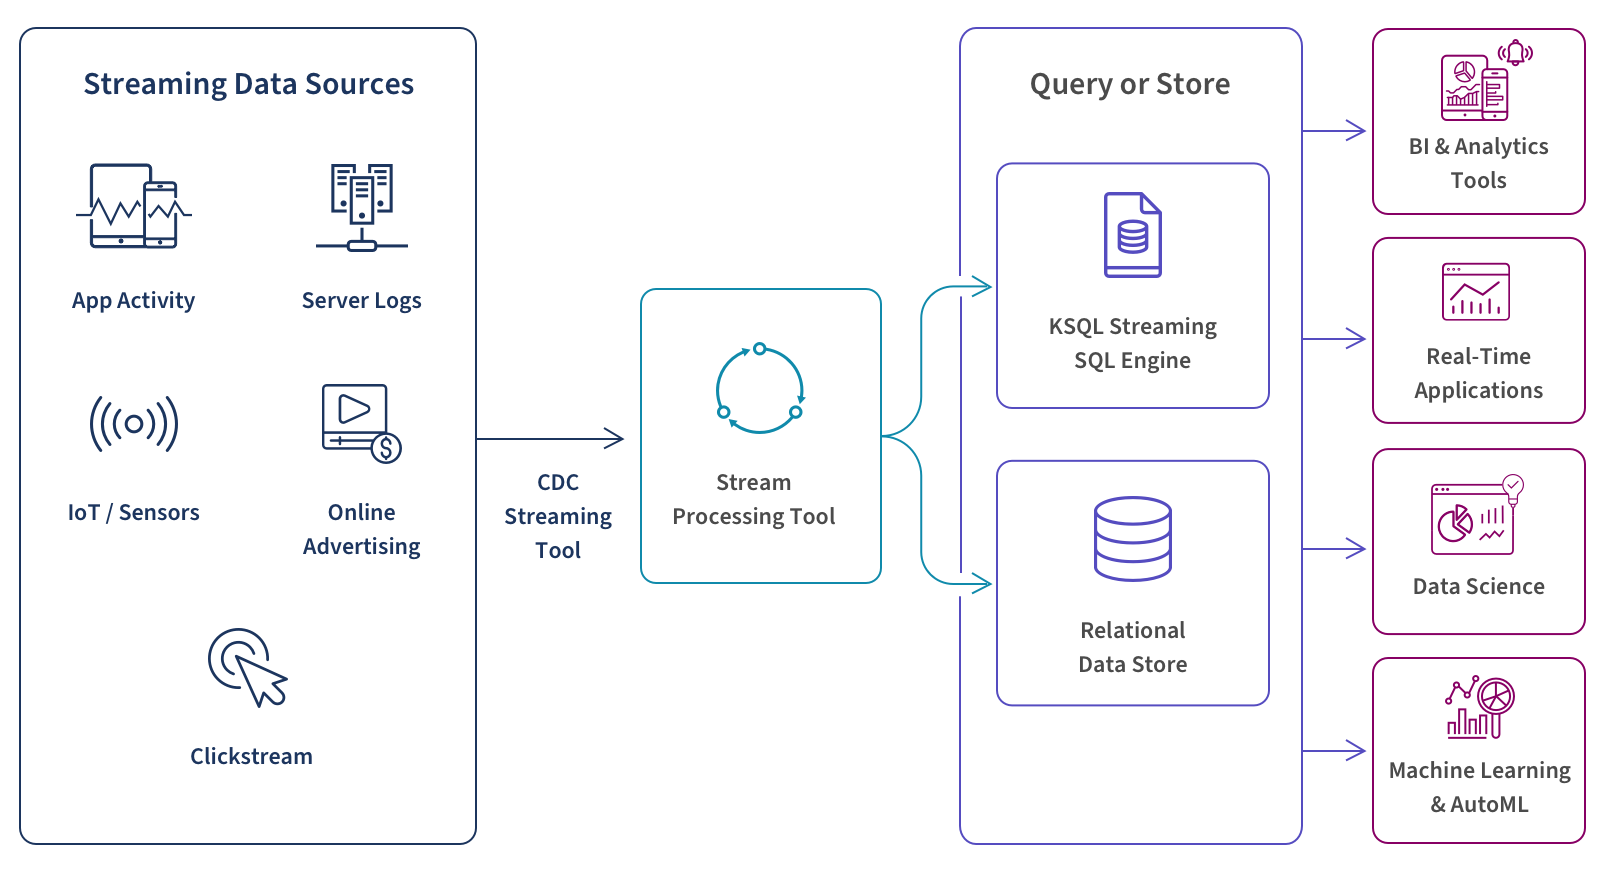 Diagram showing how streaming data sources are processed for use in BI & analytics tools, real-time applications, data science, machine learning, and AutoML